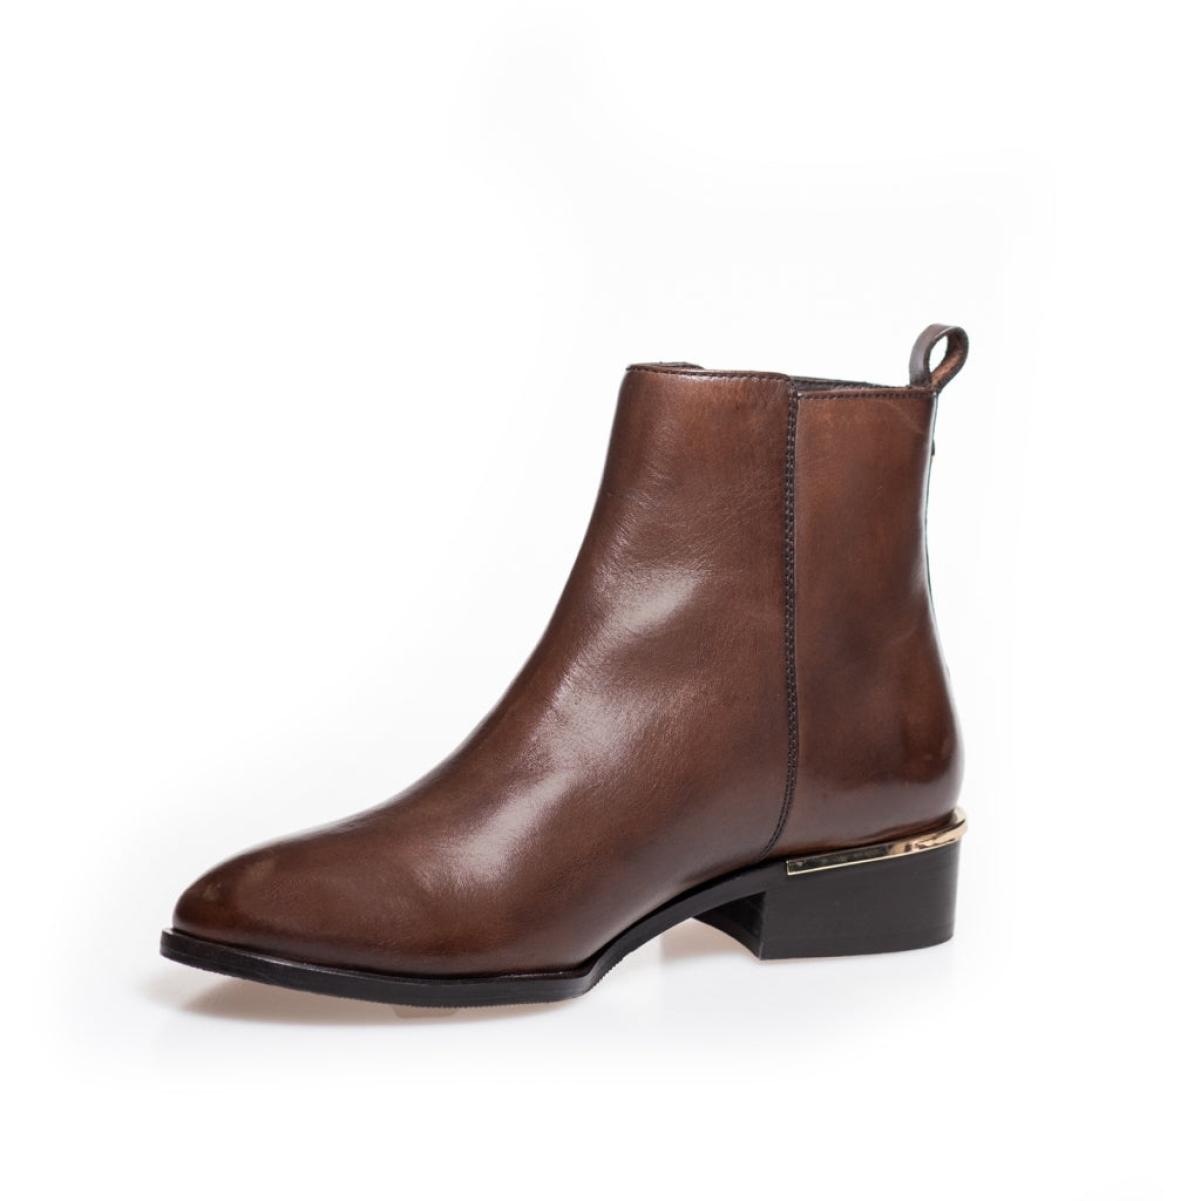 Ankle Boots Copenhagen Shoes Women Fever Leather 22 - Dark Brown Exclusive - 2